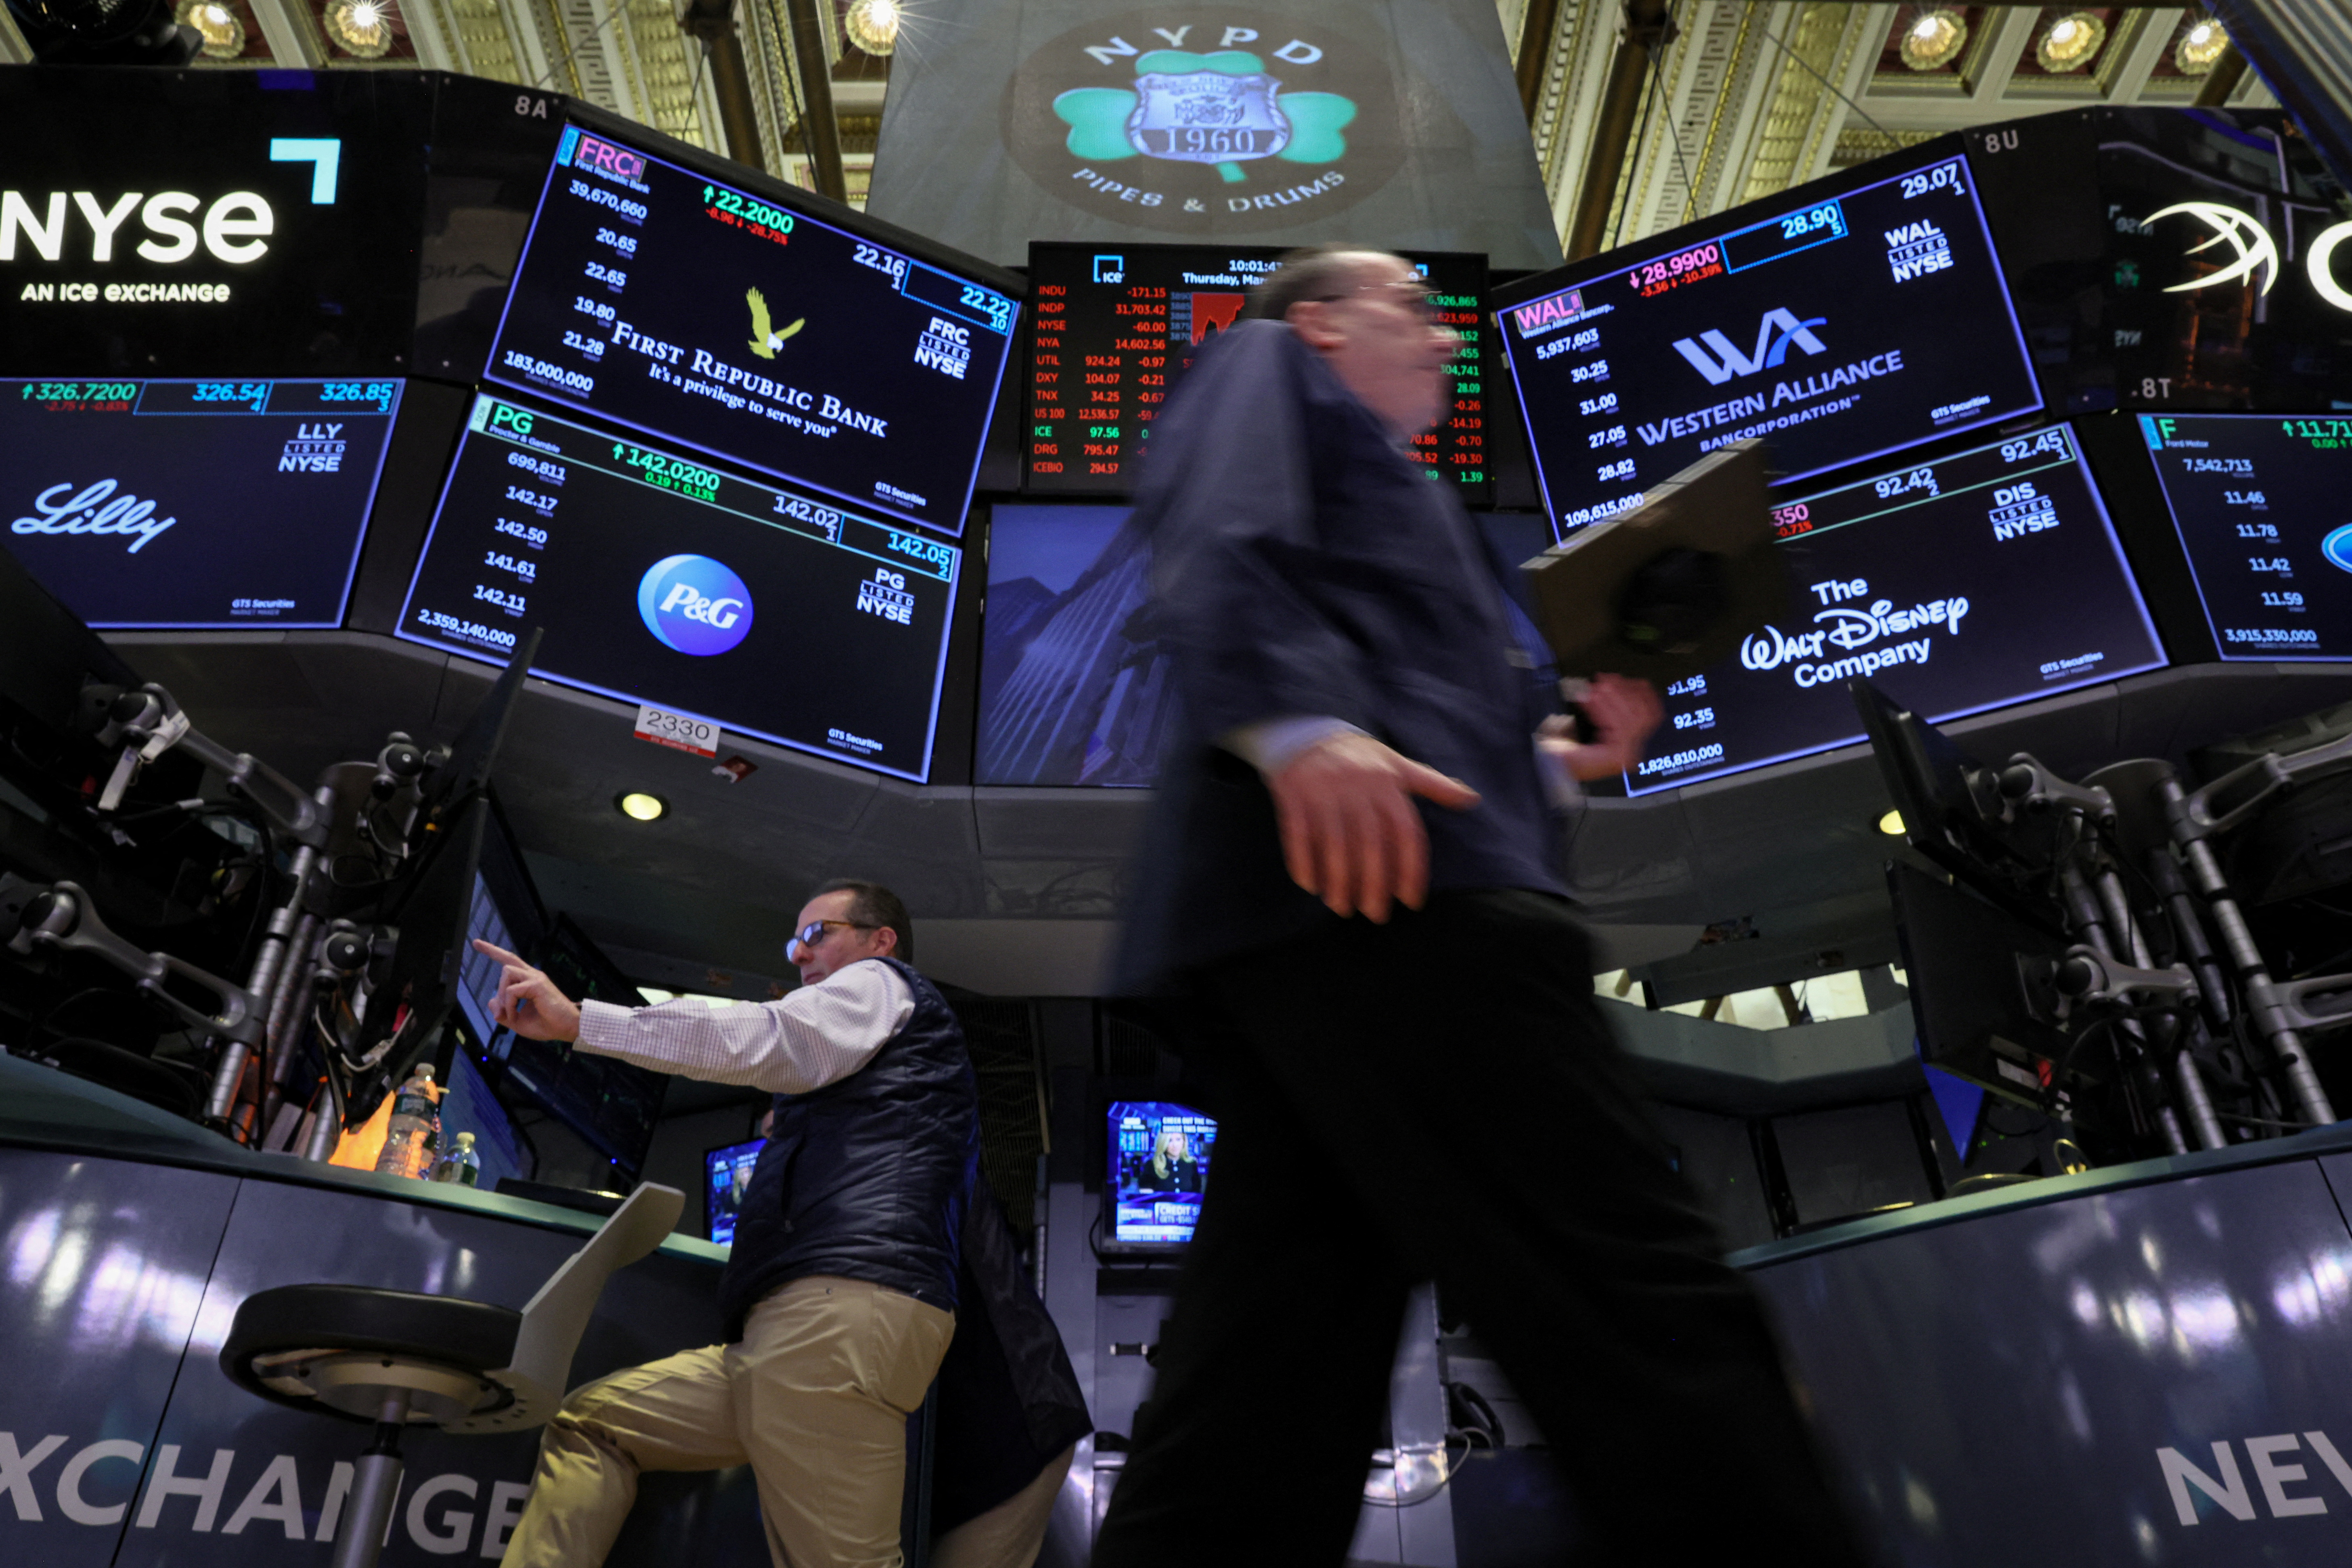 Wall Street opens muted ahead of Fed rate decision